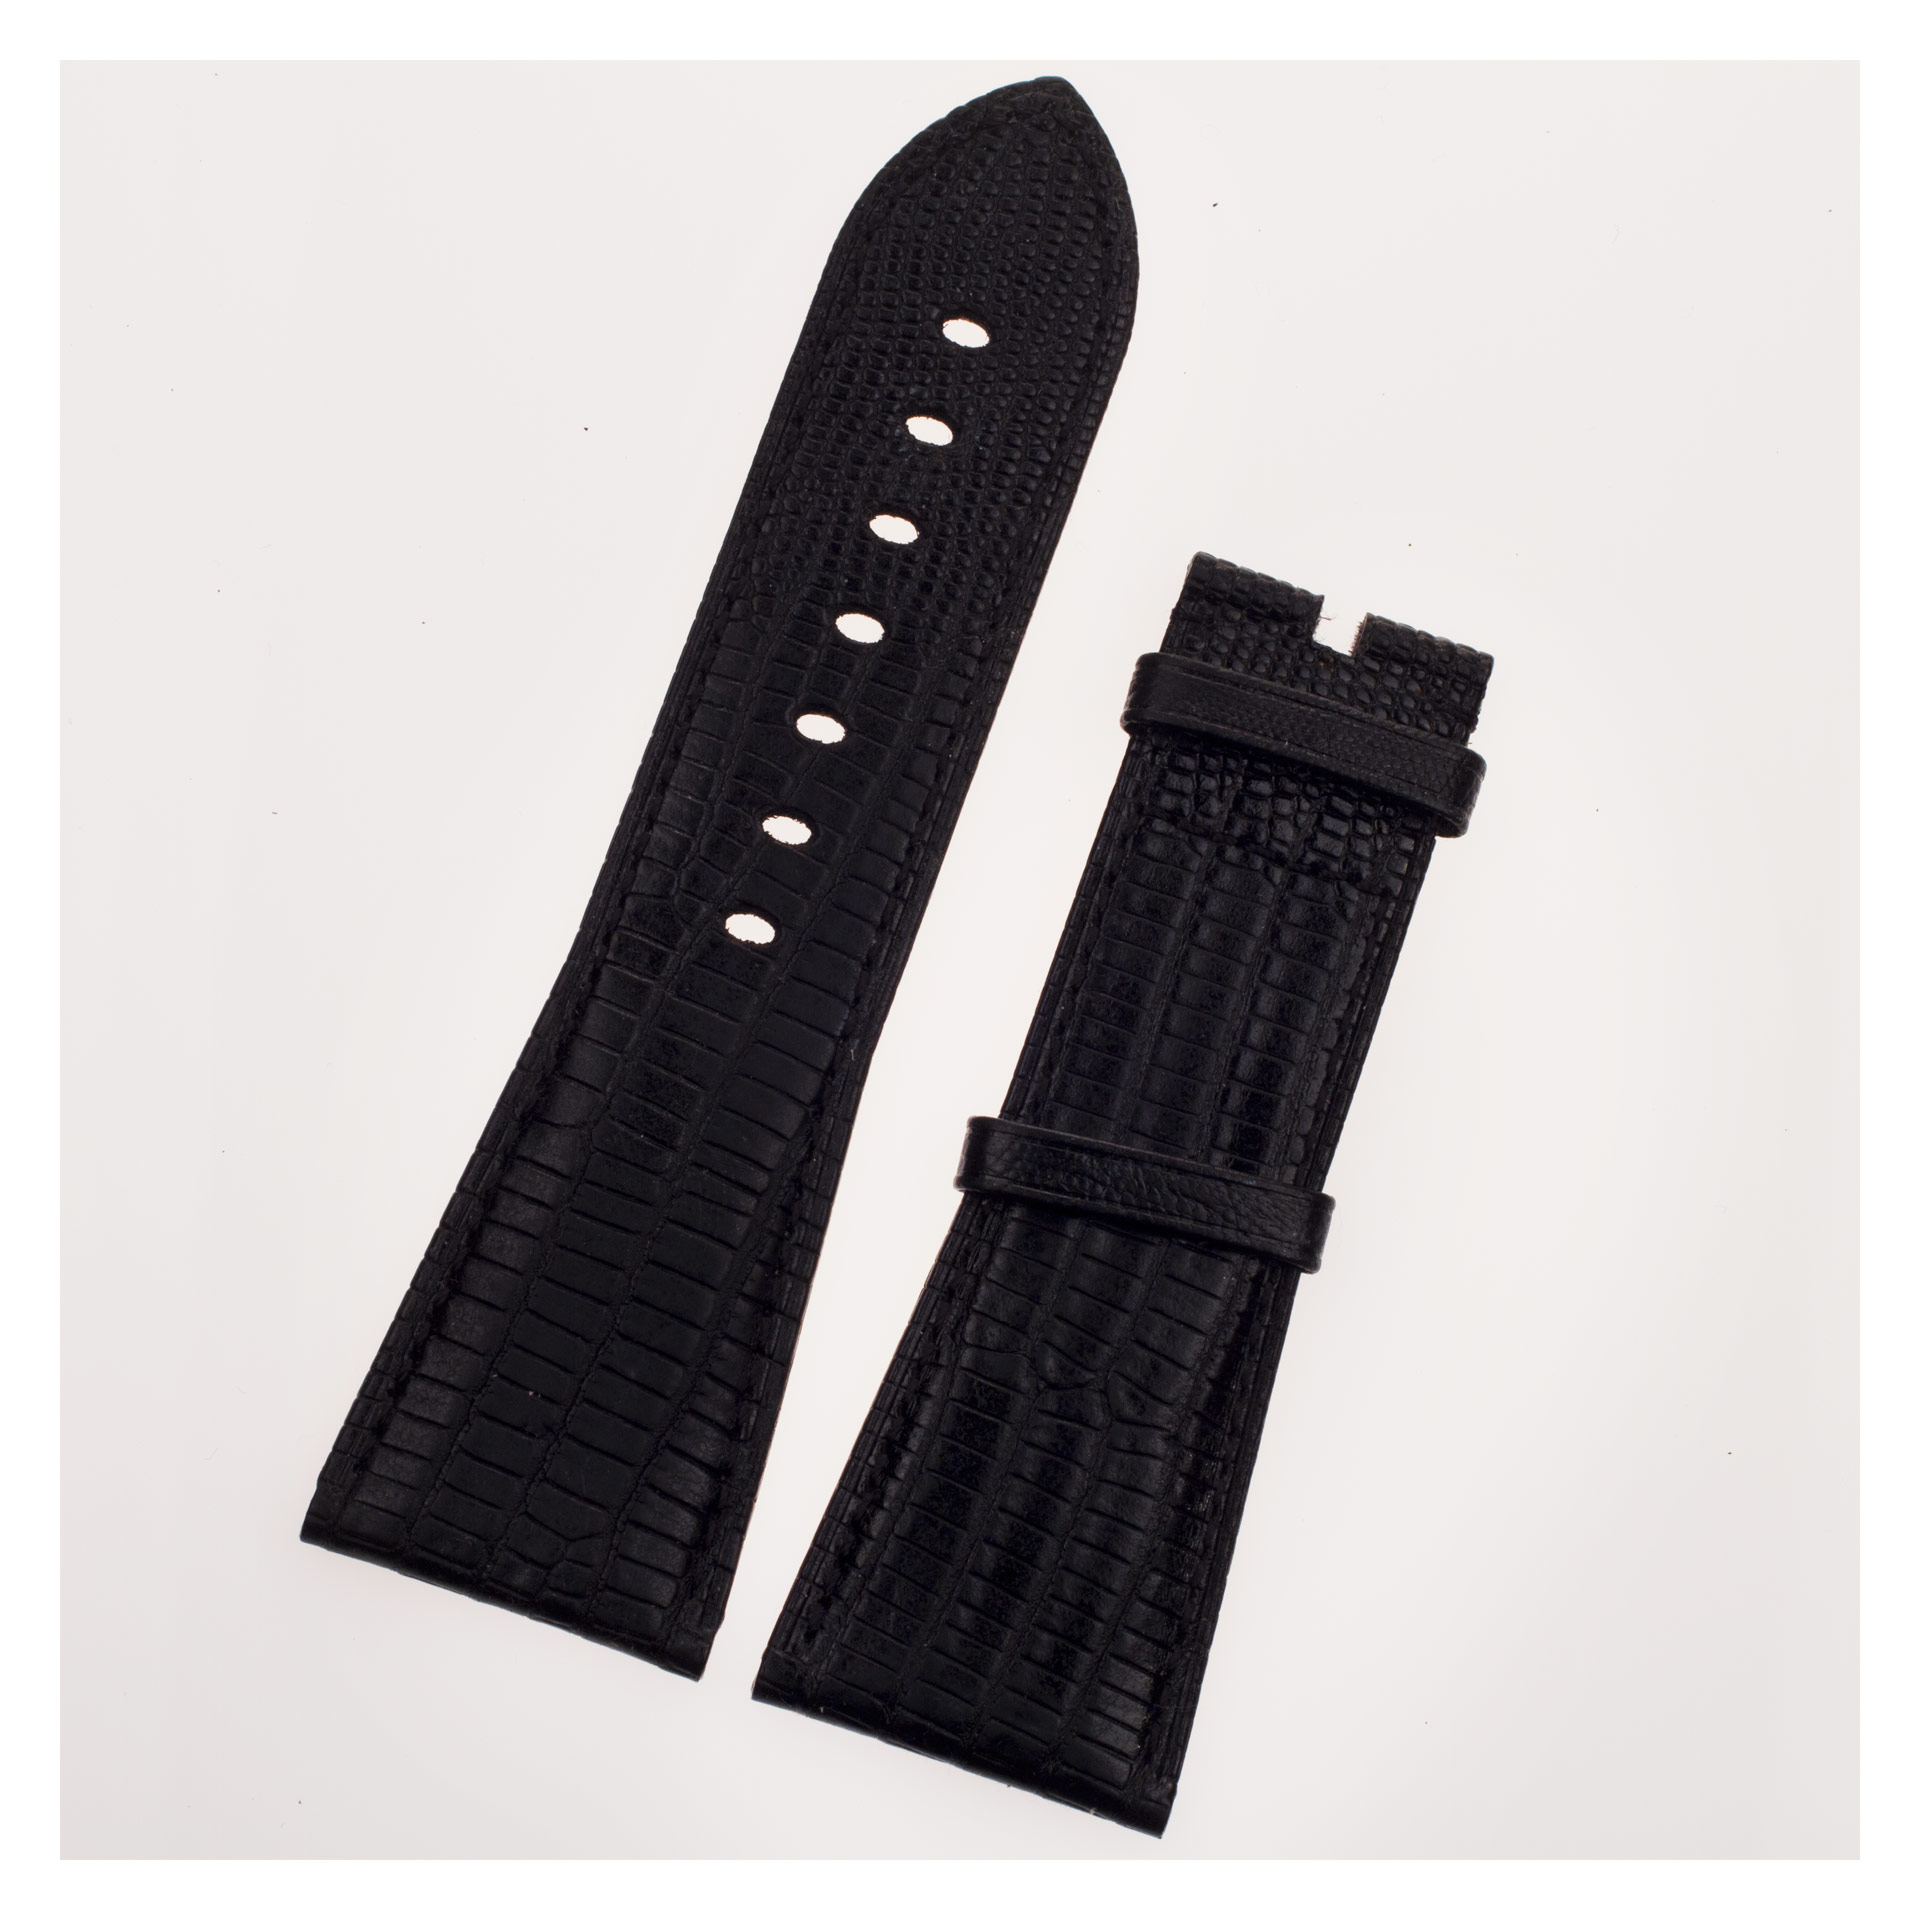 Cartier black lizard strap (29x22). With a length of 4.5" long piece and 3.25" short piece.